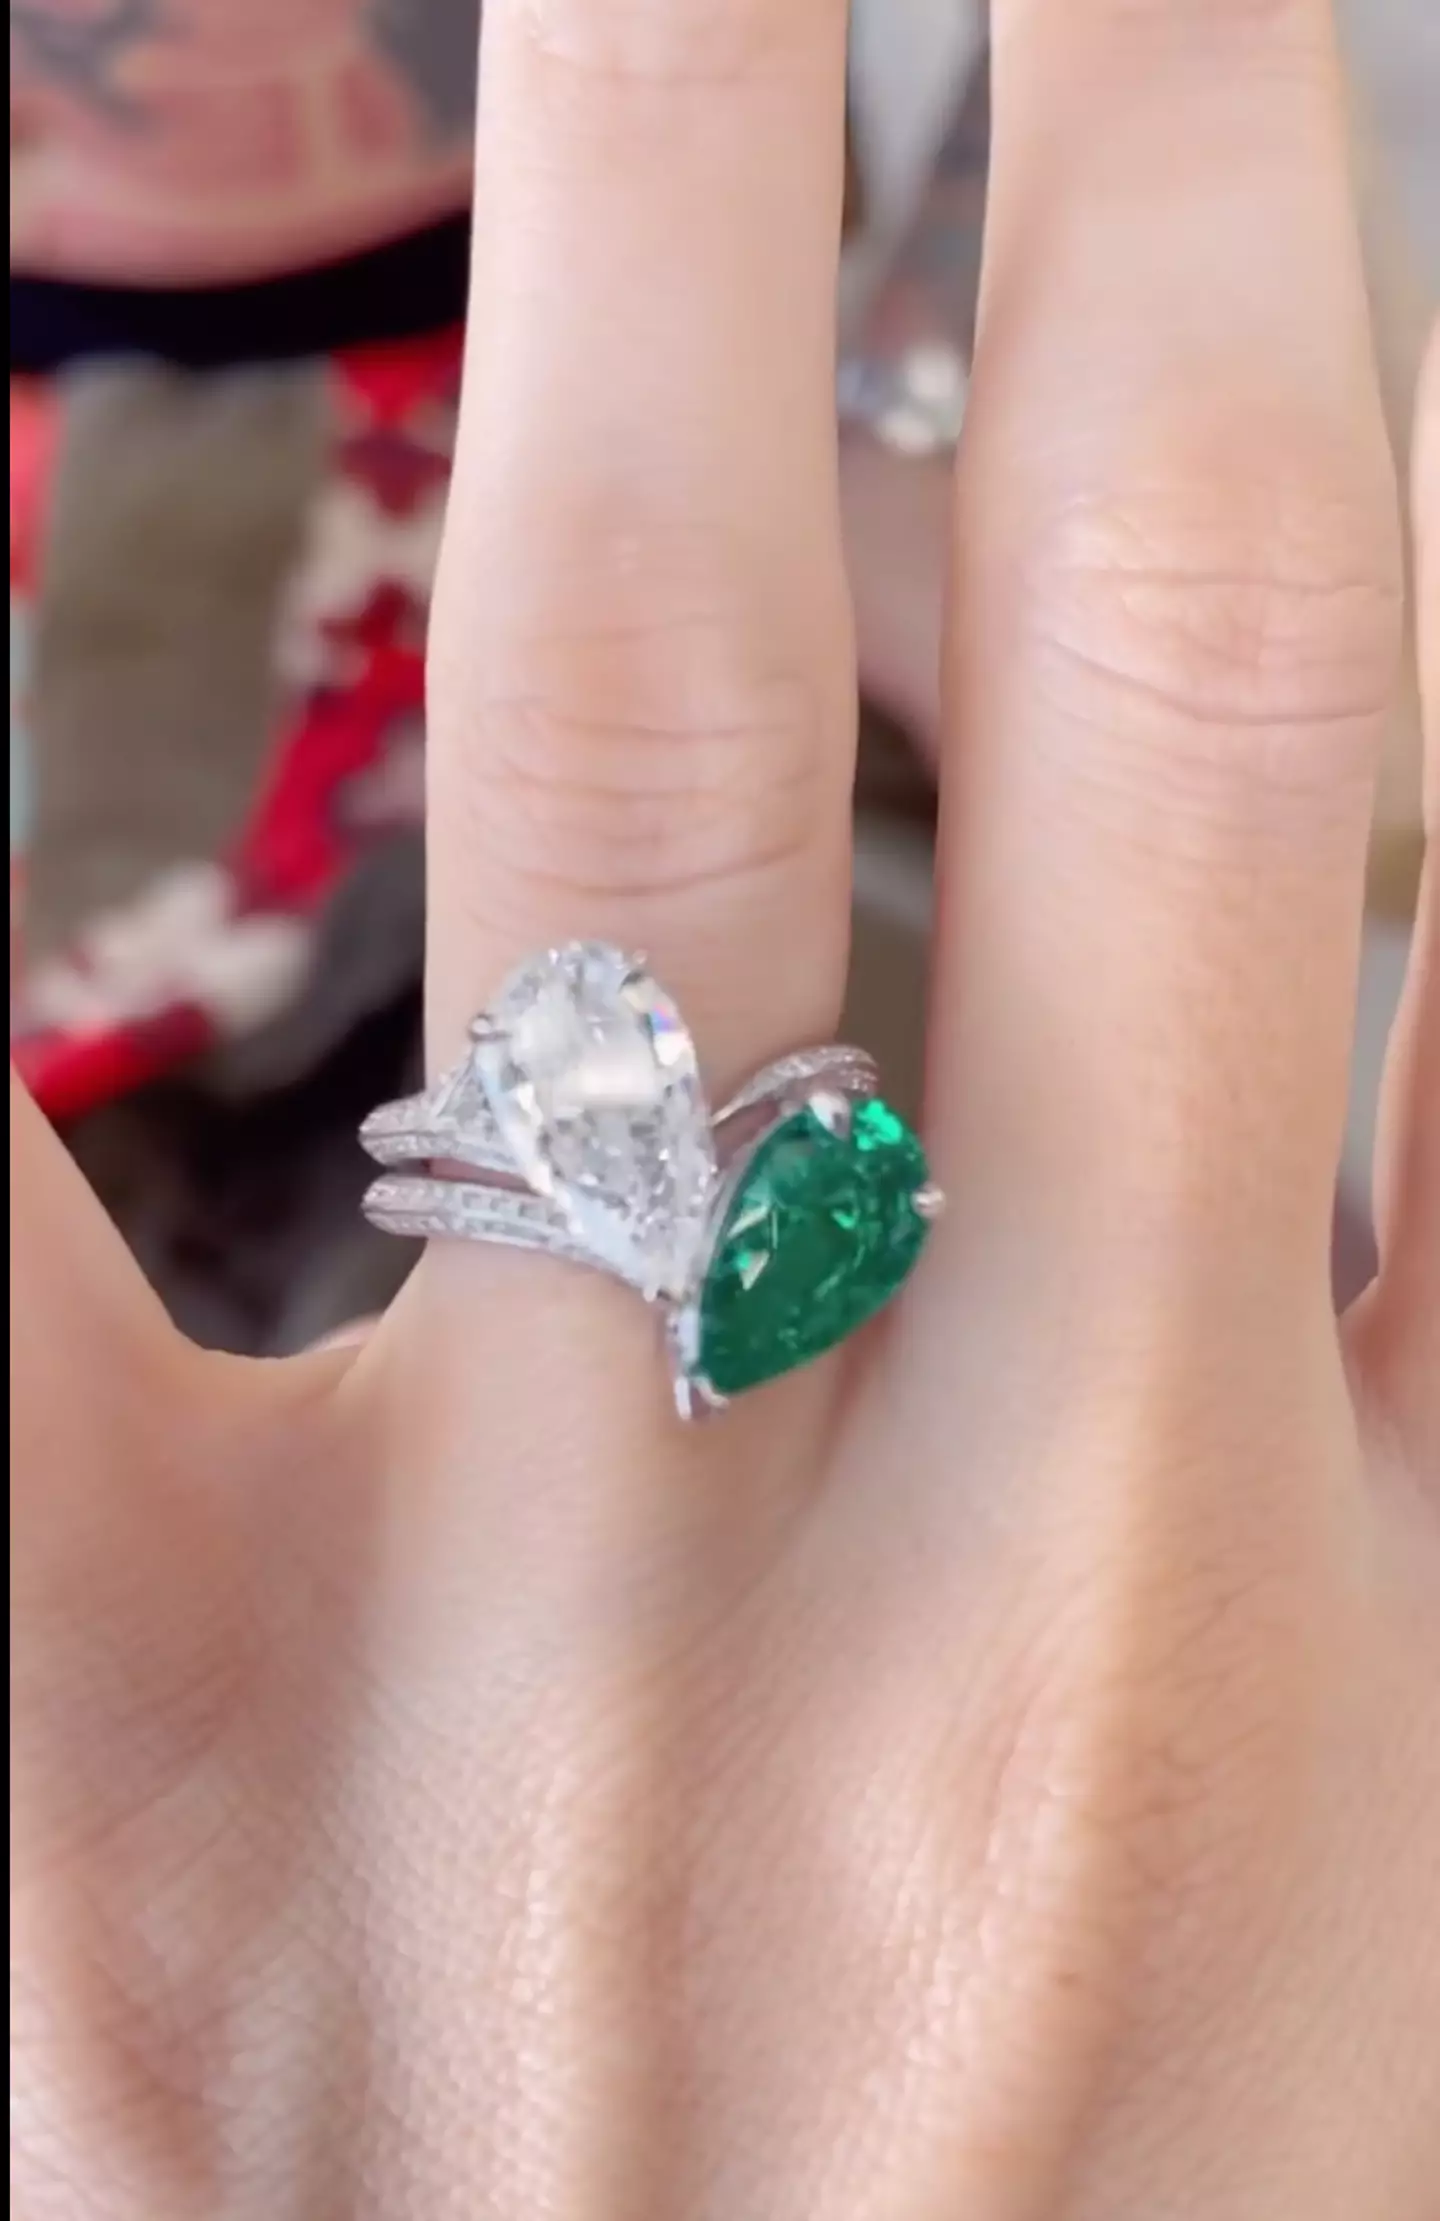 Megan's engagement ring will hurt her if she tries to take it off. (